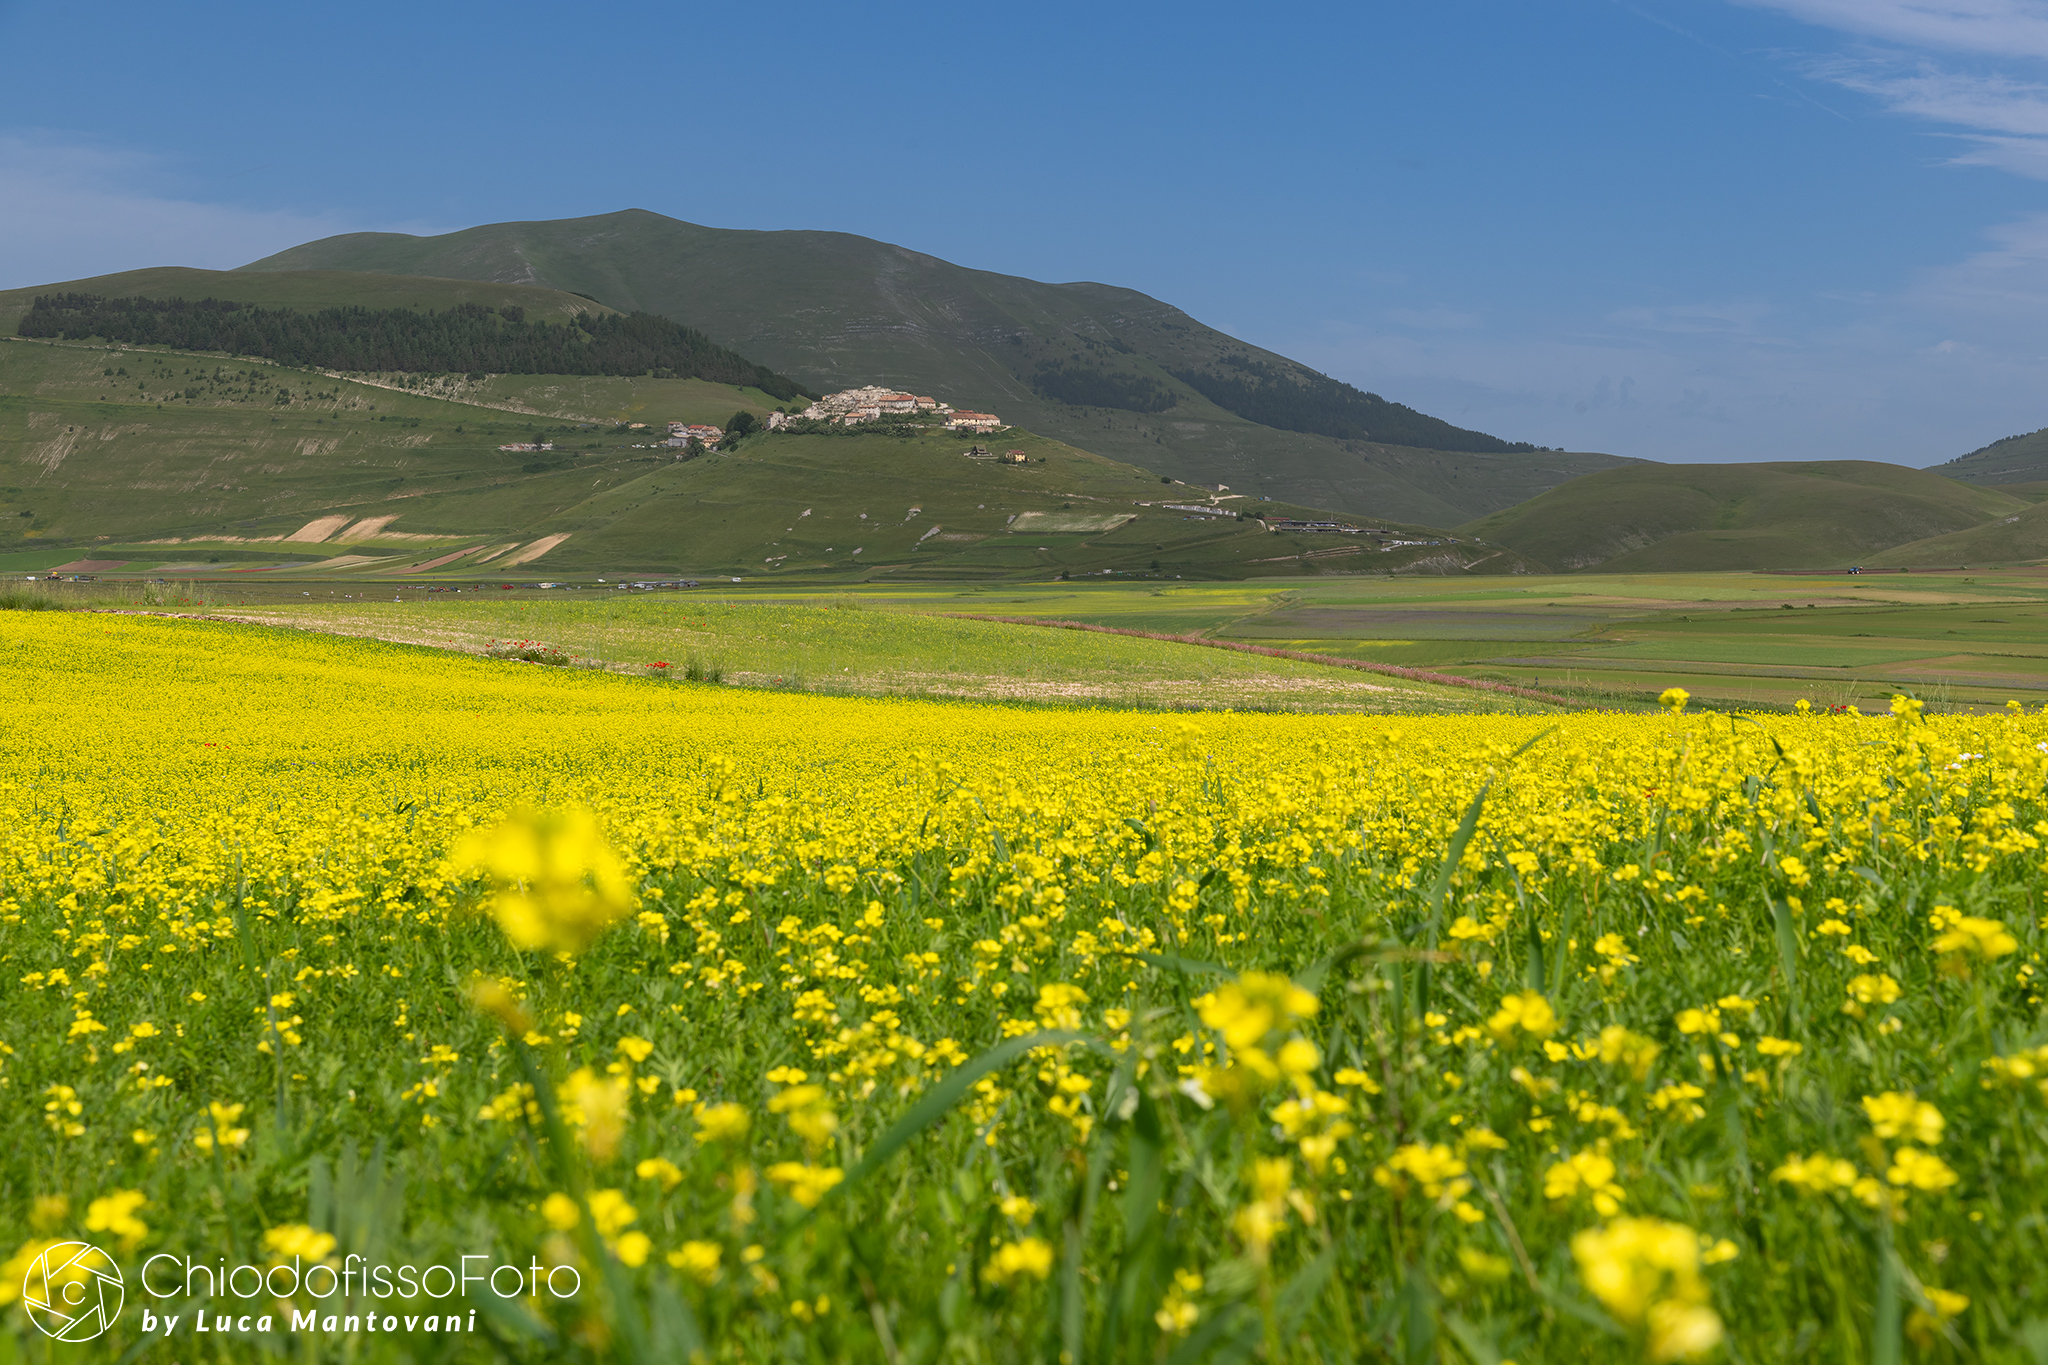 And in the background ... Castelluccio - Italy...